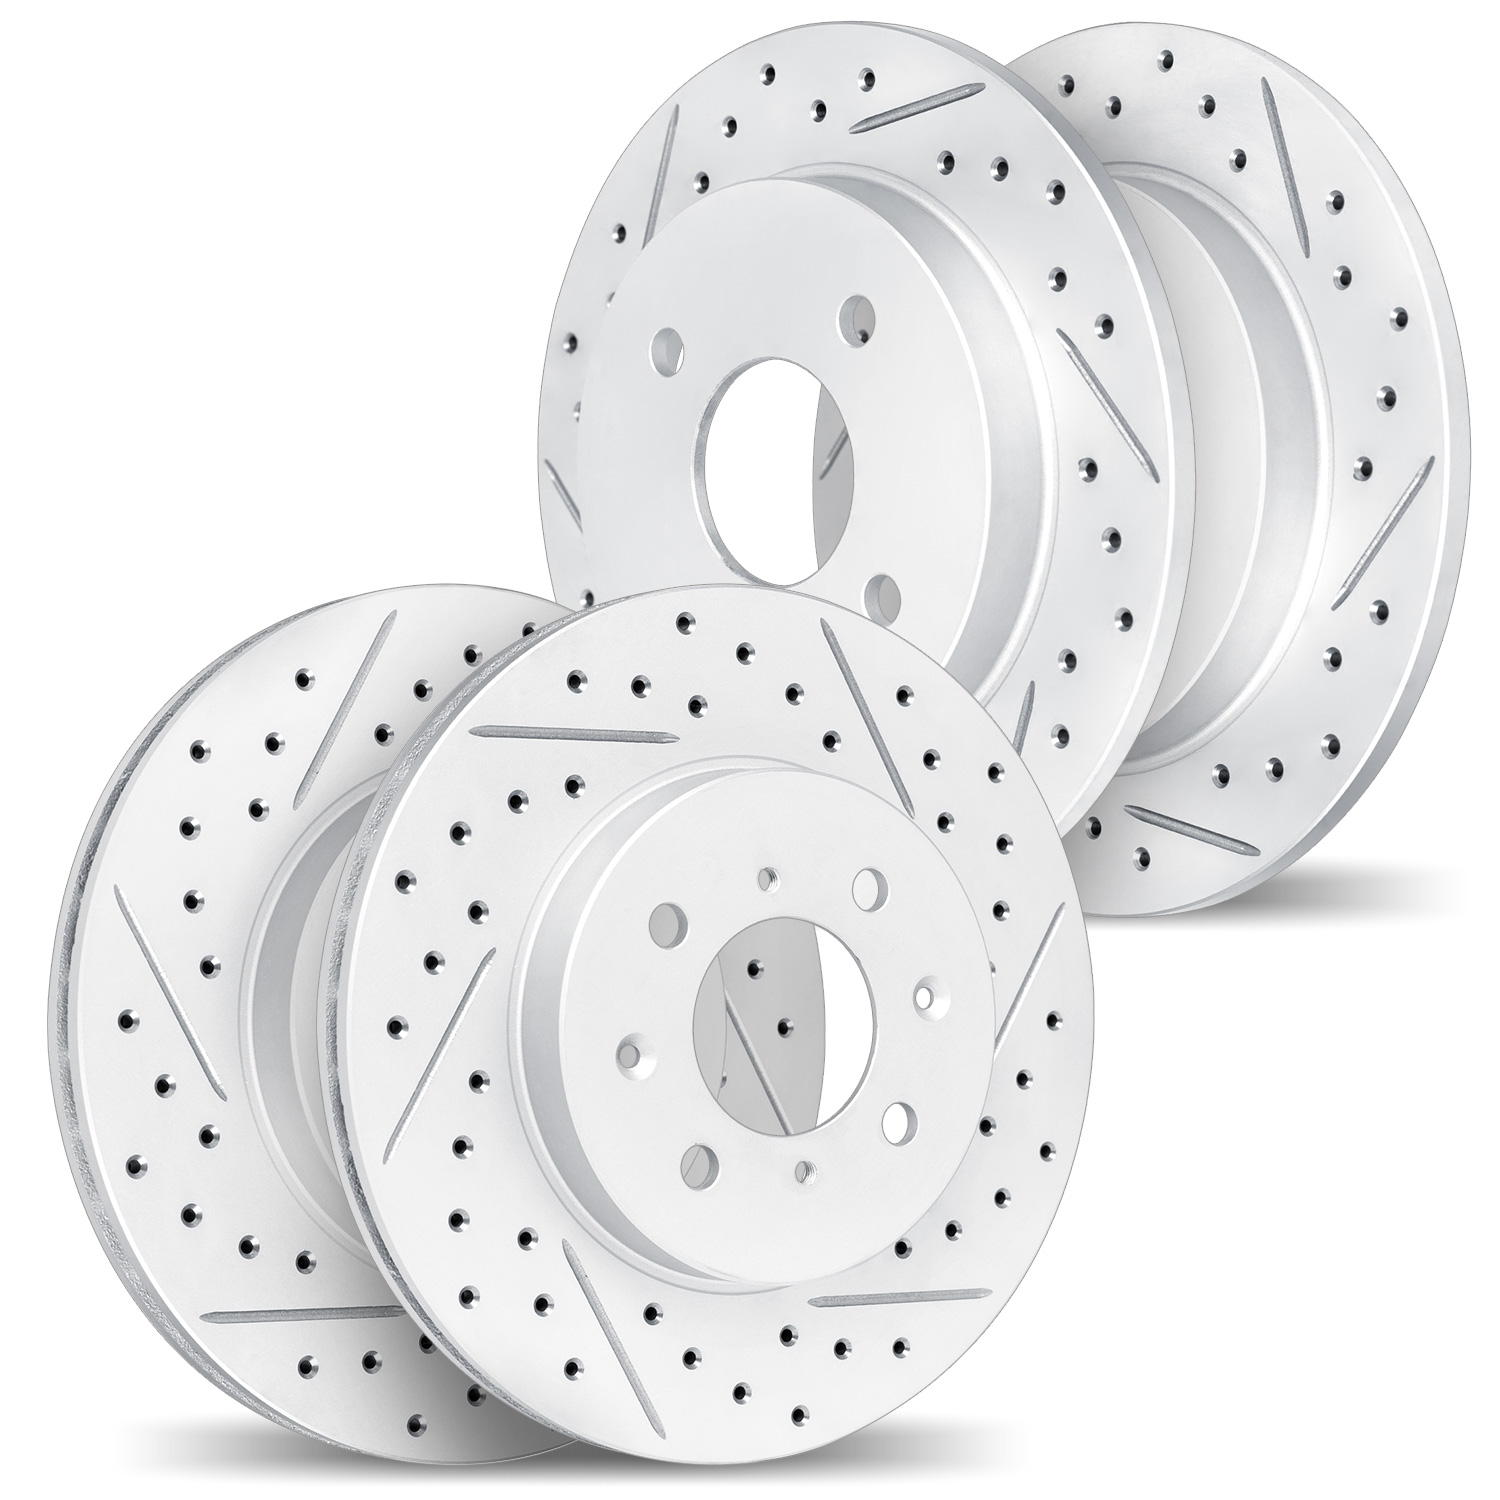 2004-03009 Geoperformance Drilled/Slotted Brake Rotors, Fits Select Kia/Hyundai/Genesis, Position: Front and Rear